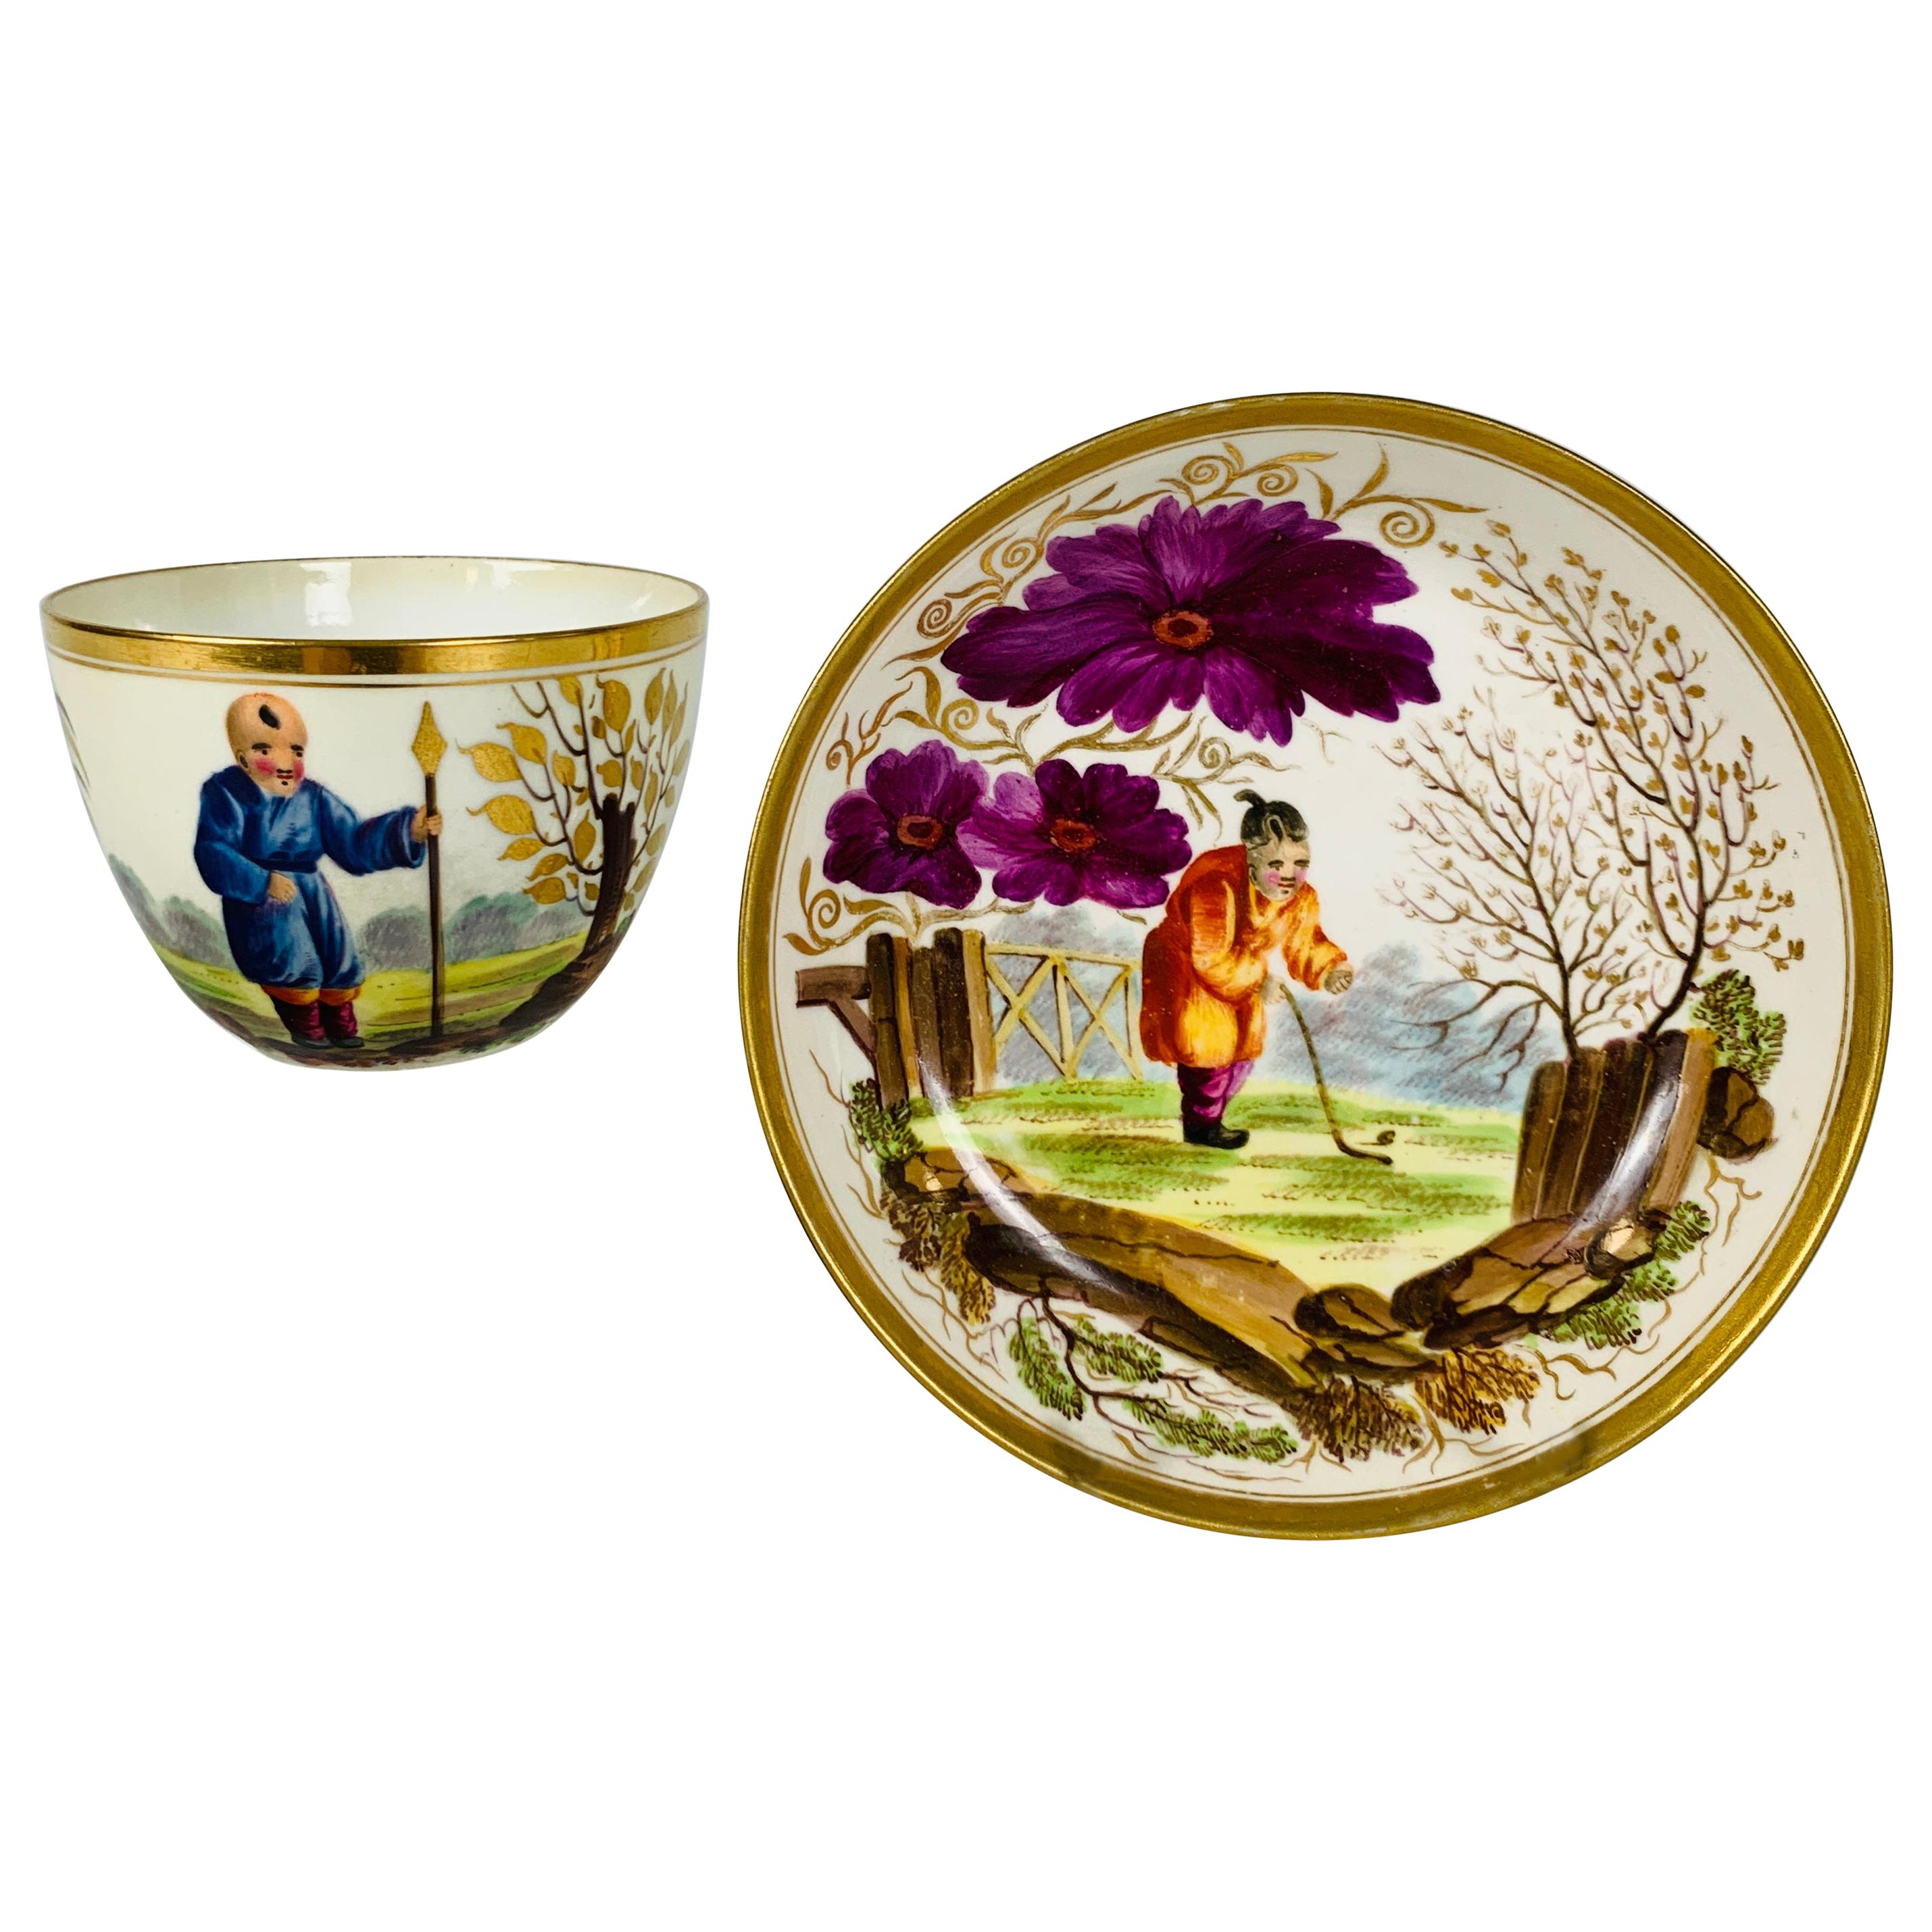 From The Collection of Mario Buatta A Minton Chinoiserie Cup and Saucer